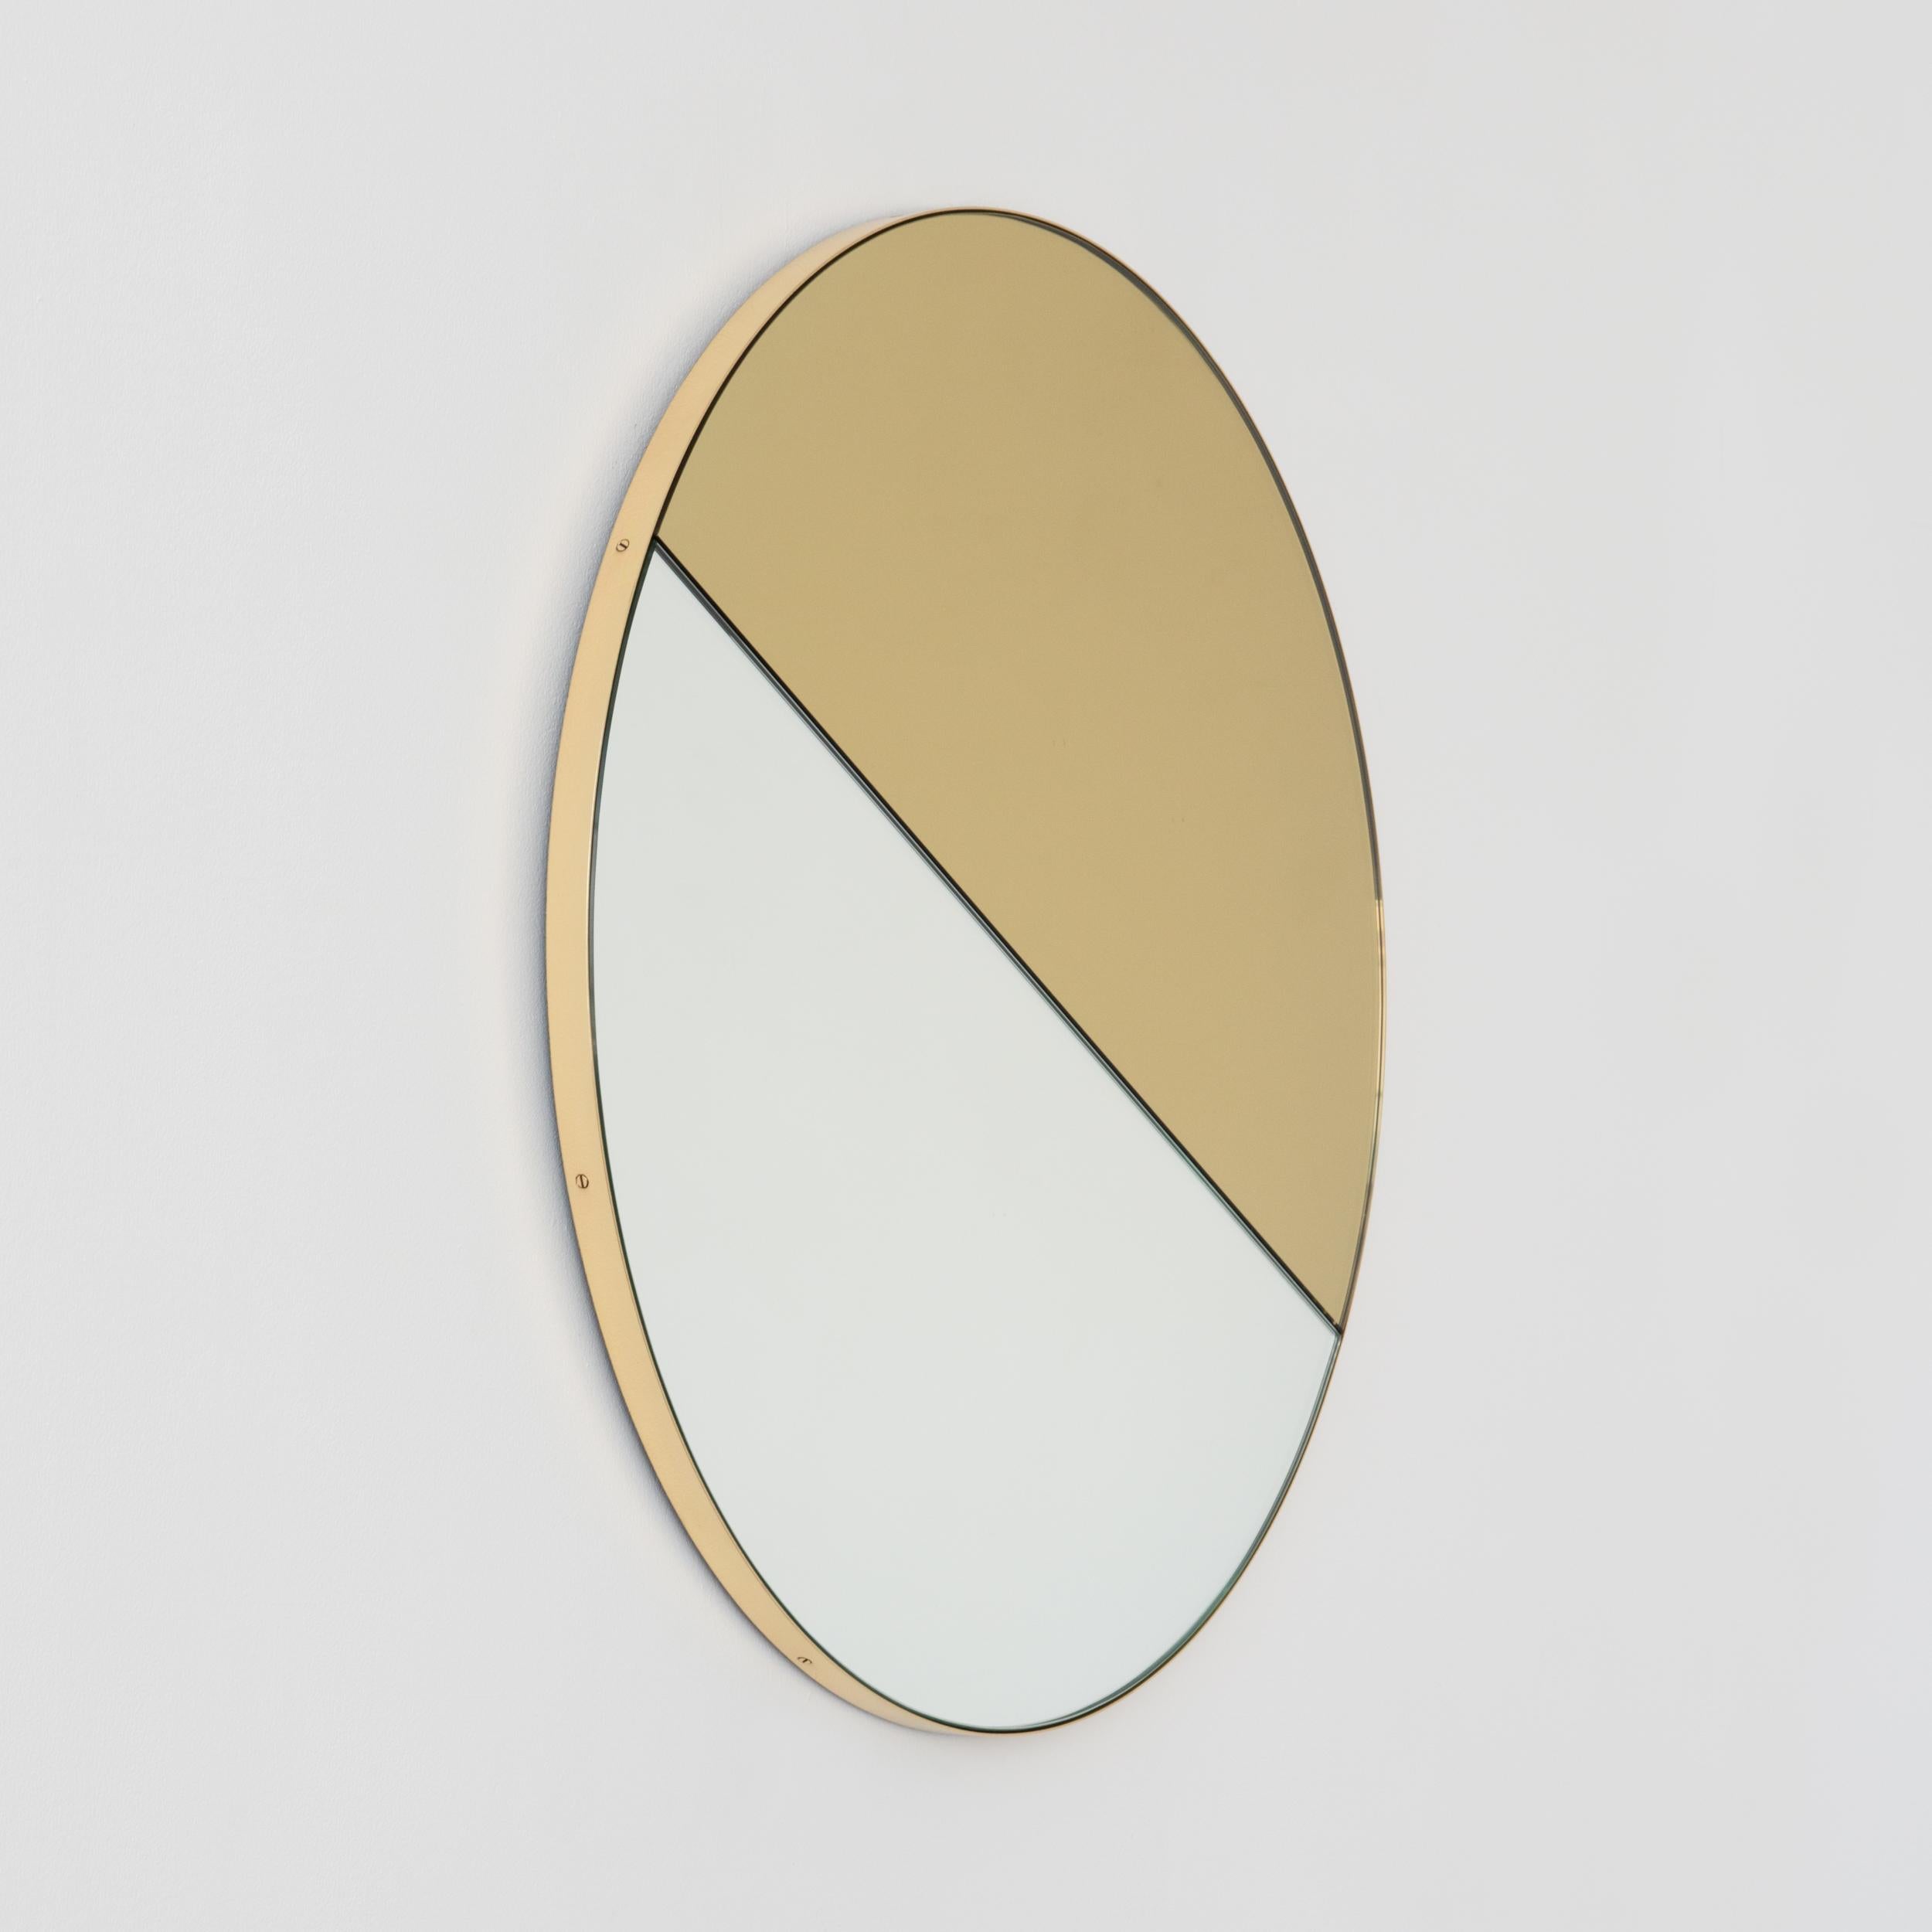 Contemporary mixed tinted gold and silver Orbis Dualis™ mirror with an elegant solid brushed brass frame. Supplied fully fitted with a specialist hanging system that allows the mirror to be hung in four different positions. Designed and handcrafted